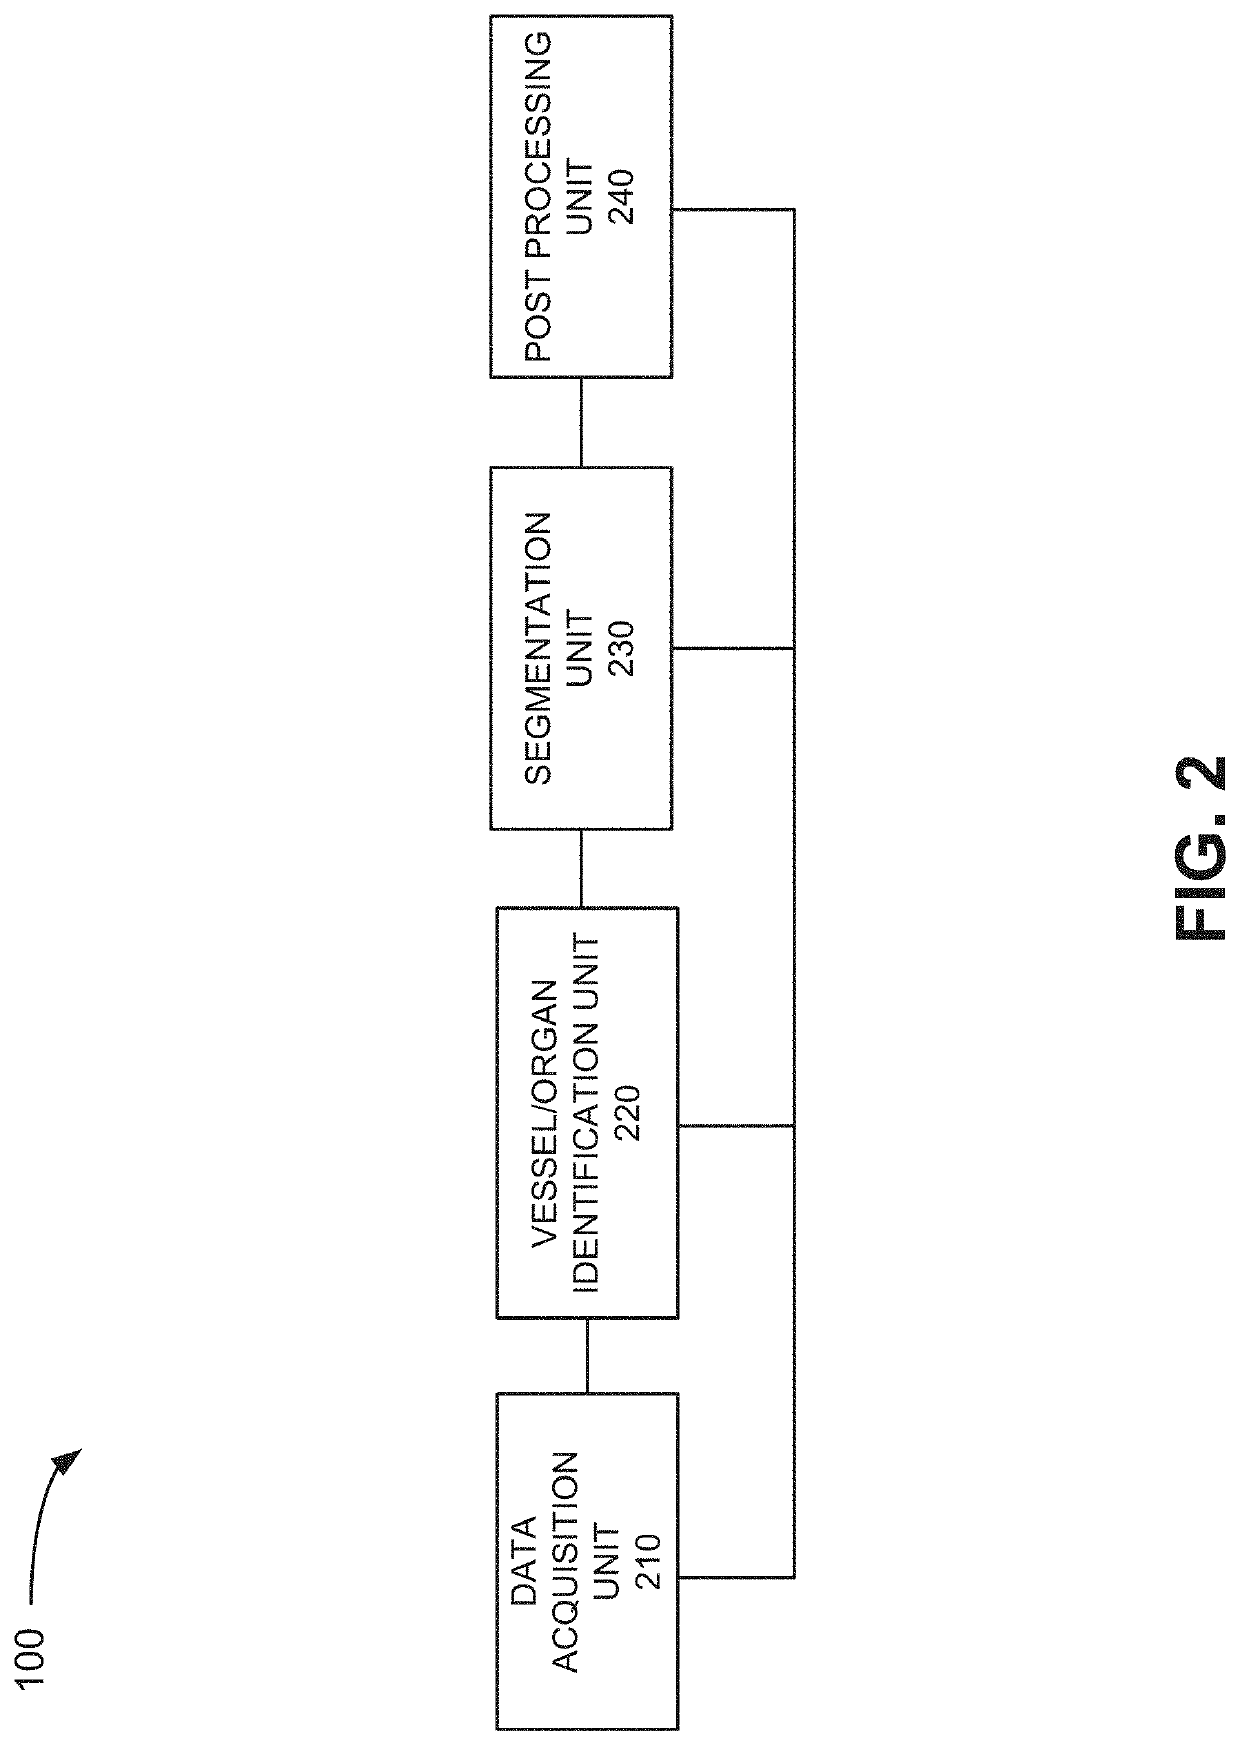 Systems and methods for quantitative abdominal aortic aneurysm analysis using 3D ultrasound imaging